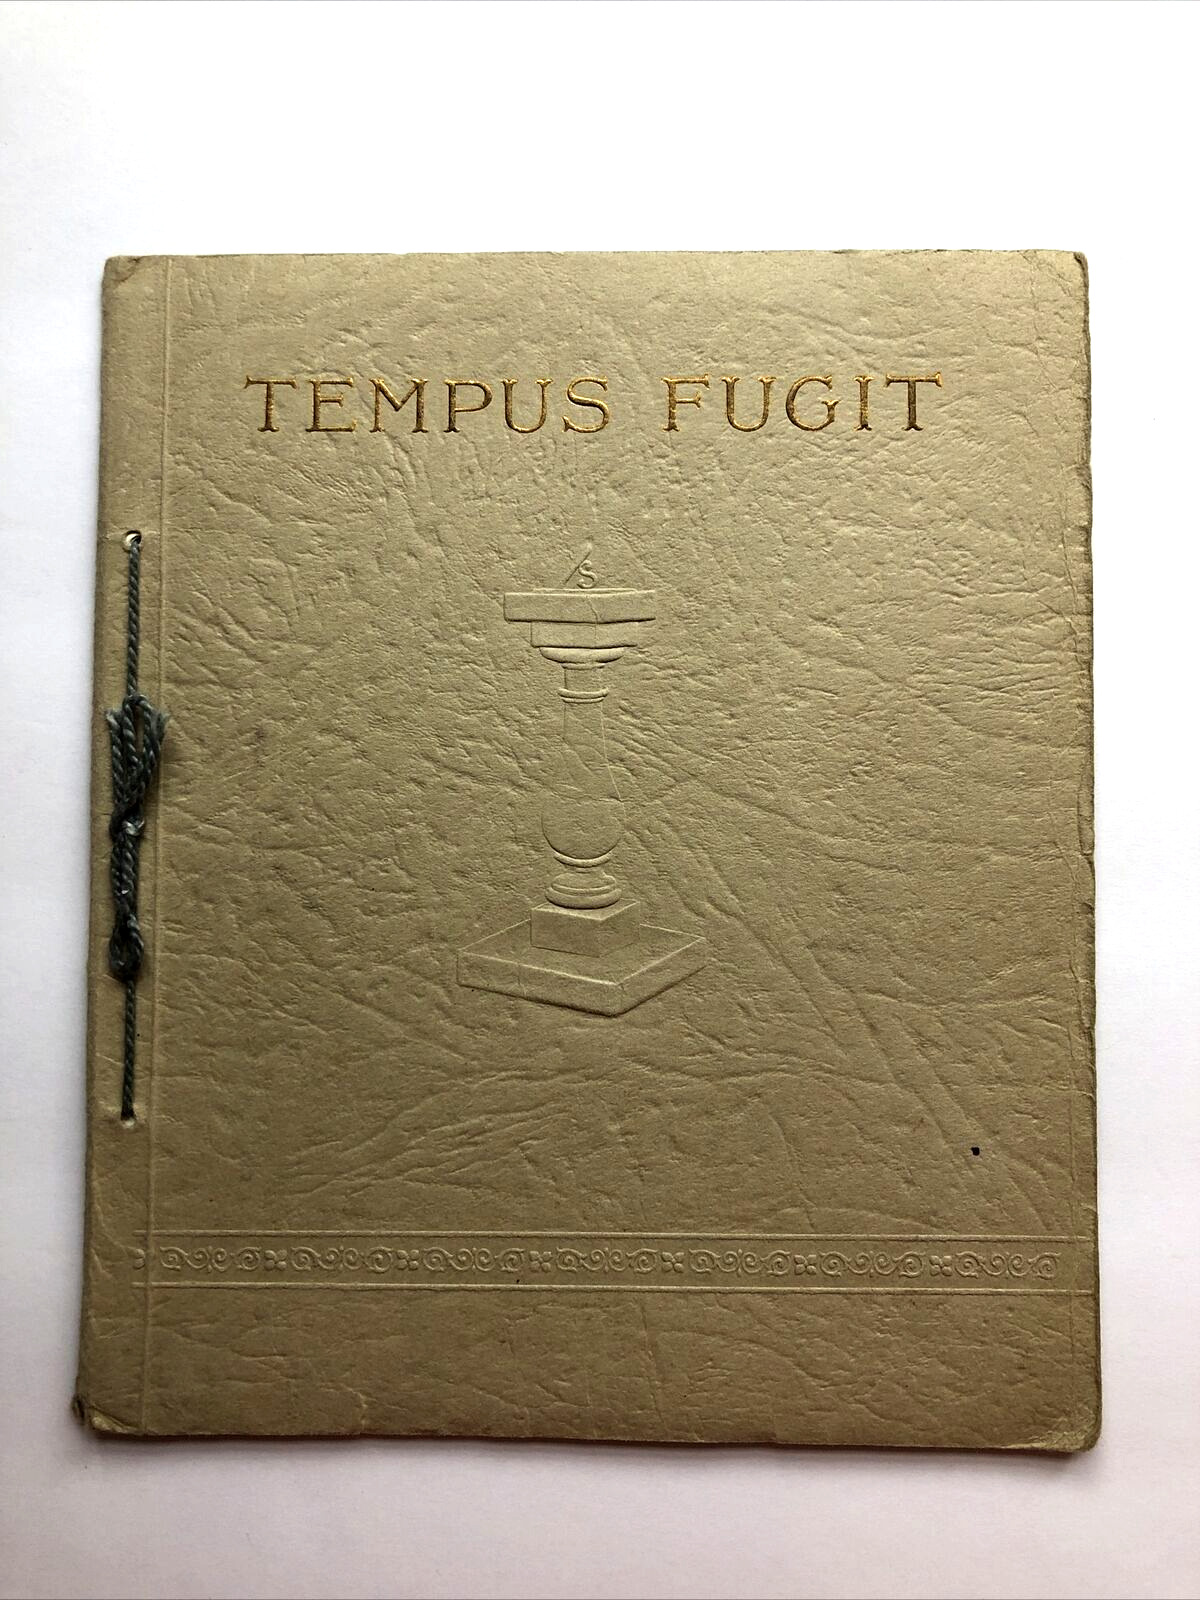 Vintage Tempus Fugit Watches For Men Catalog  Advertising London Early 1900s